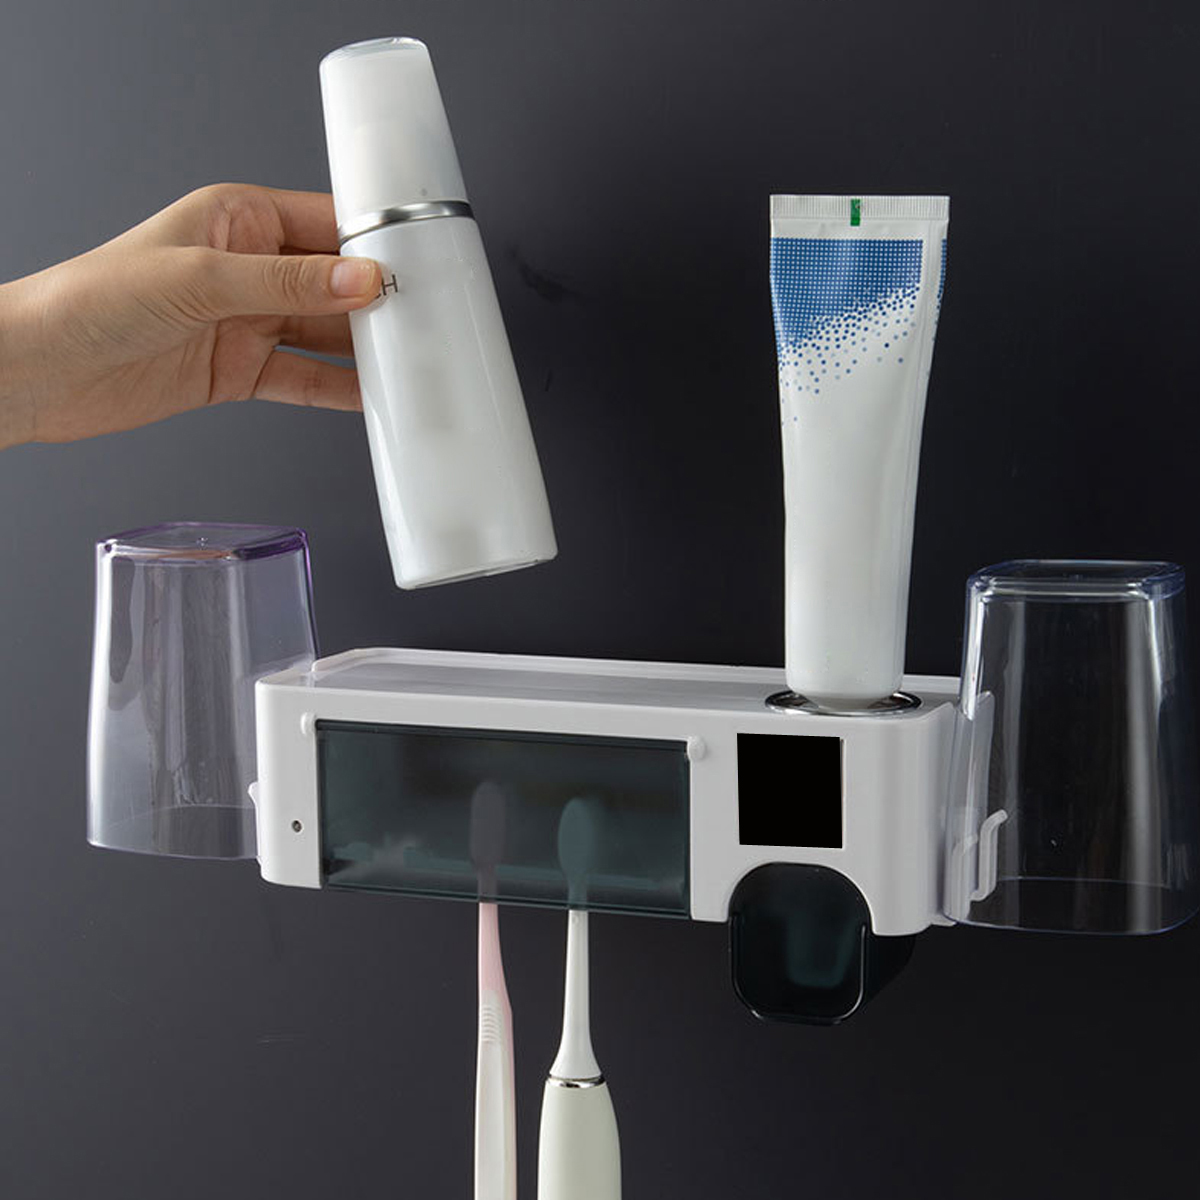 Ultraviolet-Electric-Toothbrush-Sterilizer-Wall-Mount-Toothbrush-Storage-Holder-Automatic-Toothpaste-1681238-7